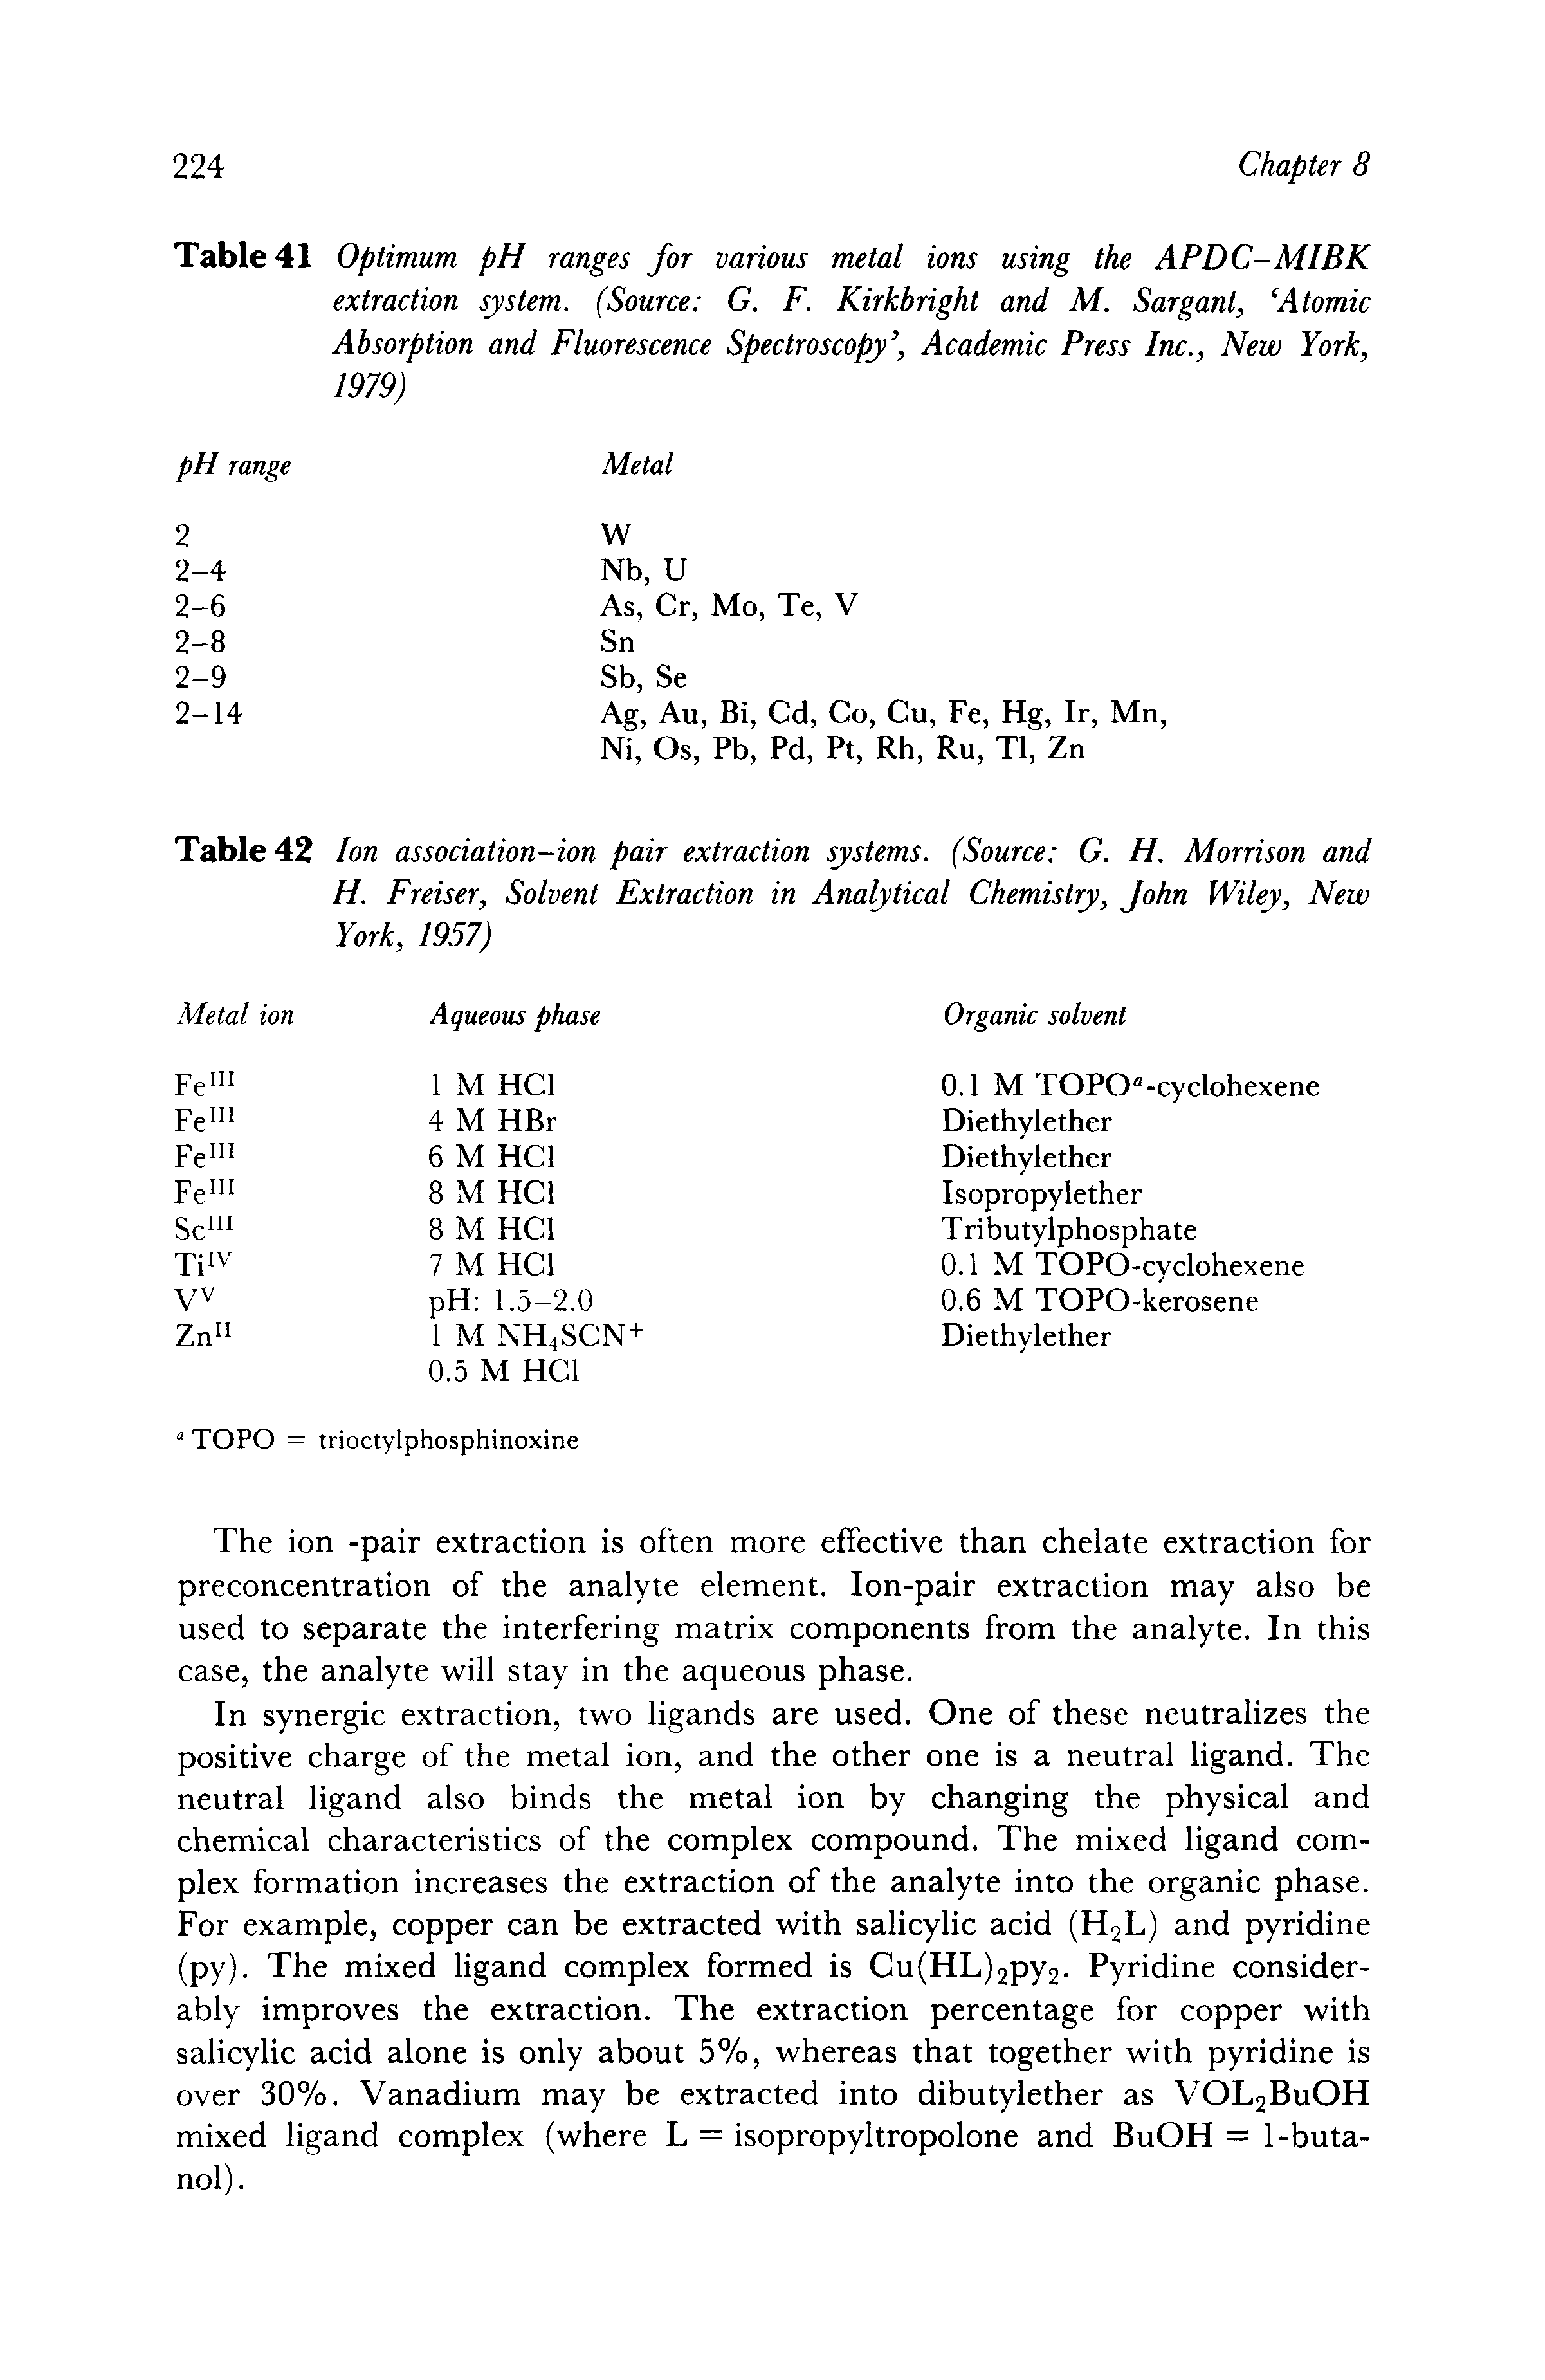 Table 42 Ion association-ion pair extraction systems. (Source G. H. Morrison and H. Freiser, Solvent Extraction in Analytical Chemistry, John Wiley, New York, 1957)...